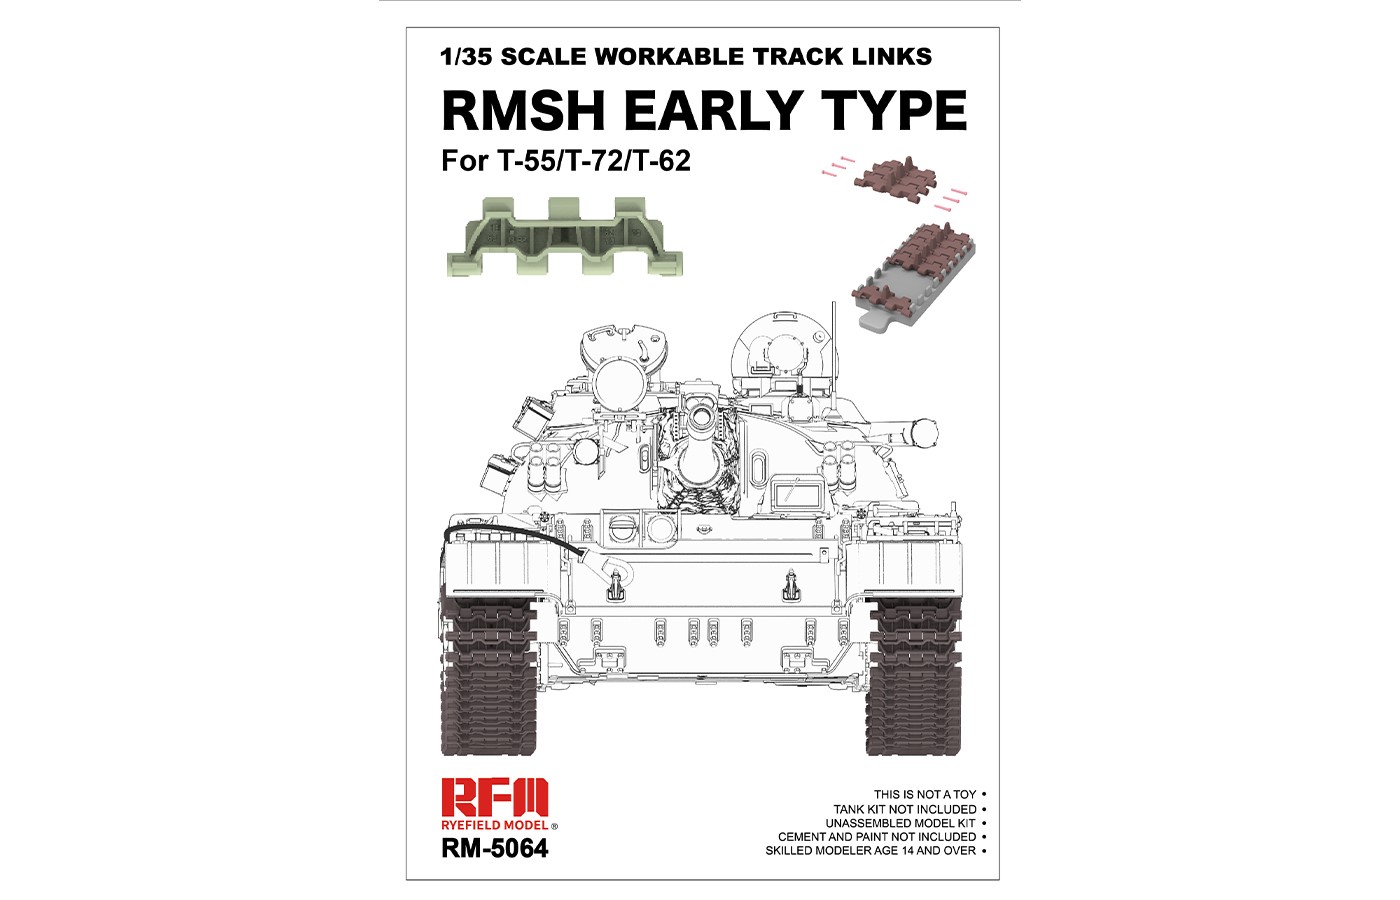 RM-5064 RMSH EARLY TYPE For T-55/T-72/T-62